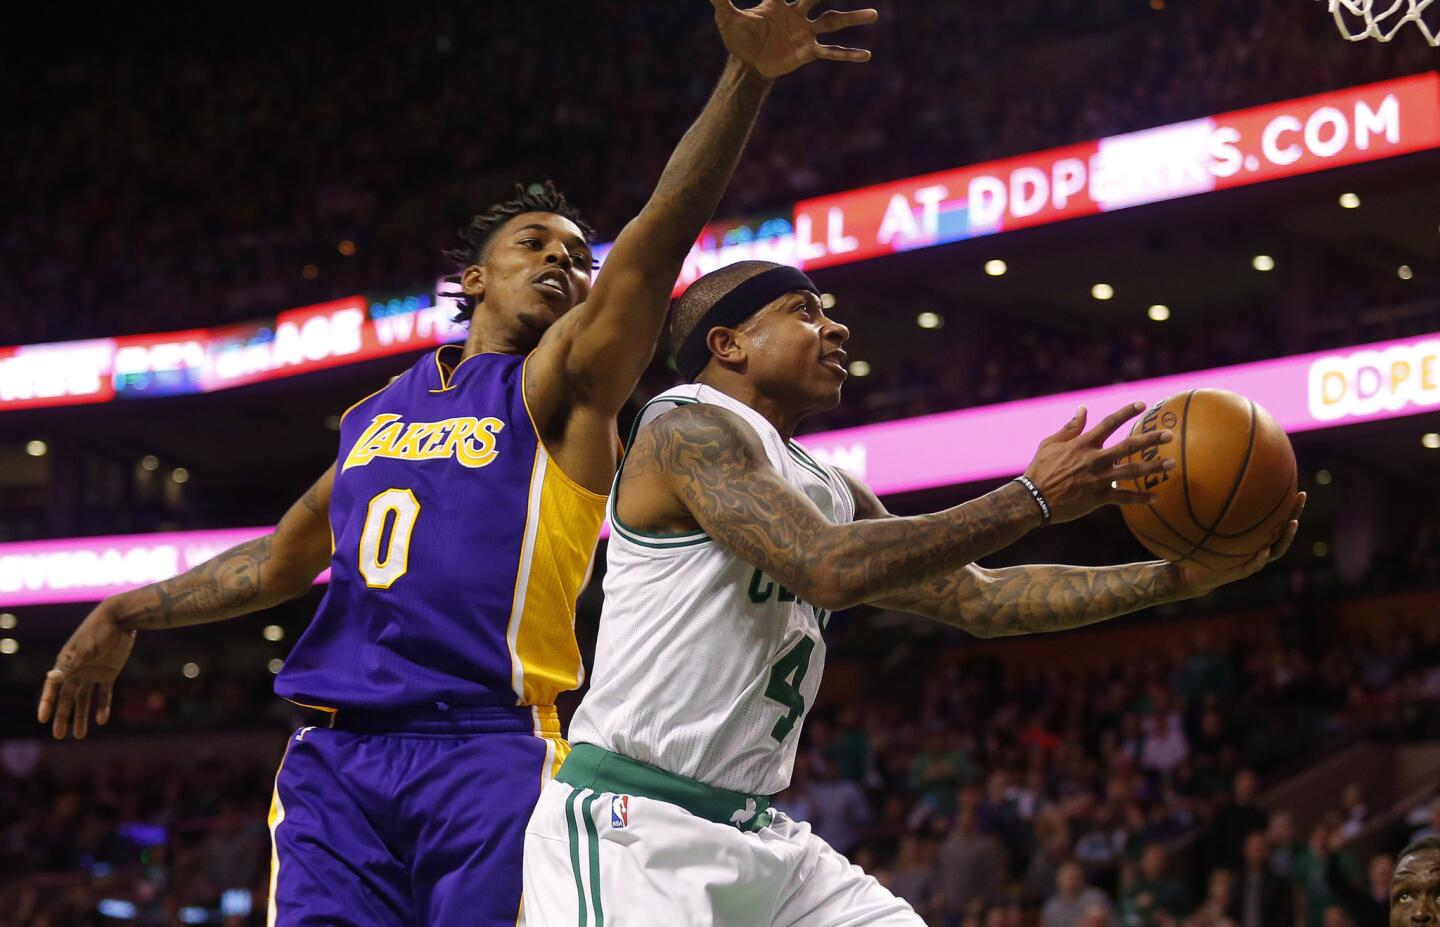 Celtics guard Isaiah Thomas drives past Lakers guard Nick Young for a layup during the first half.